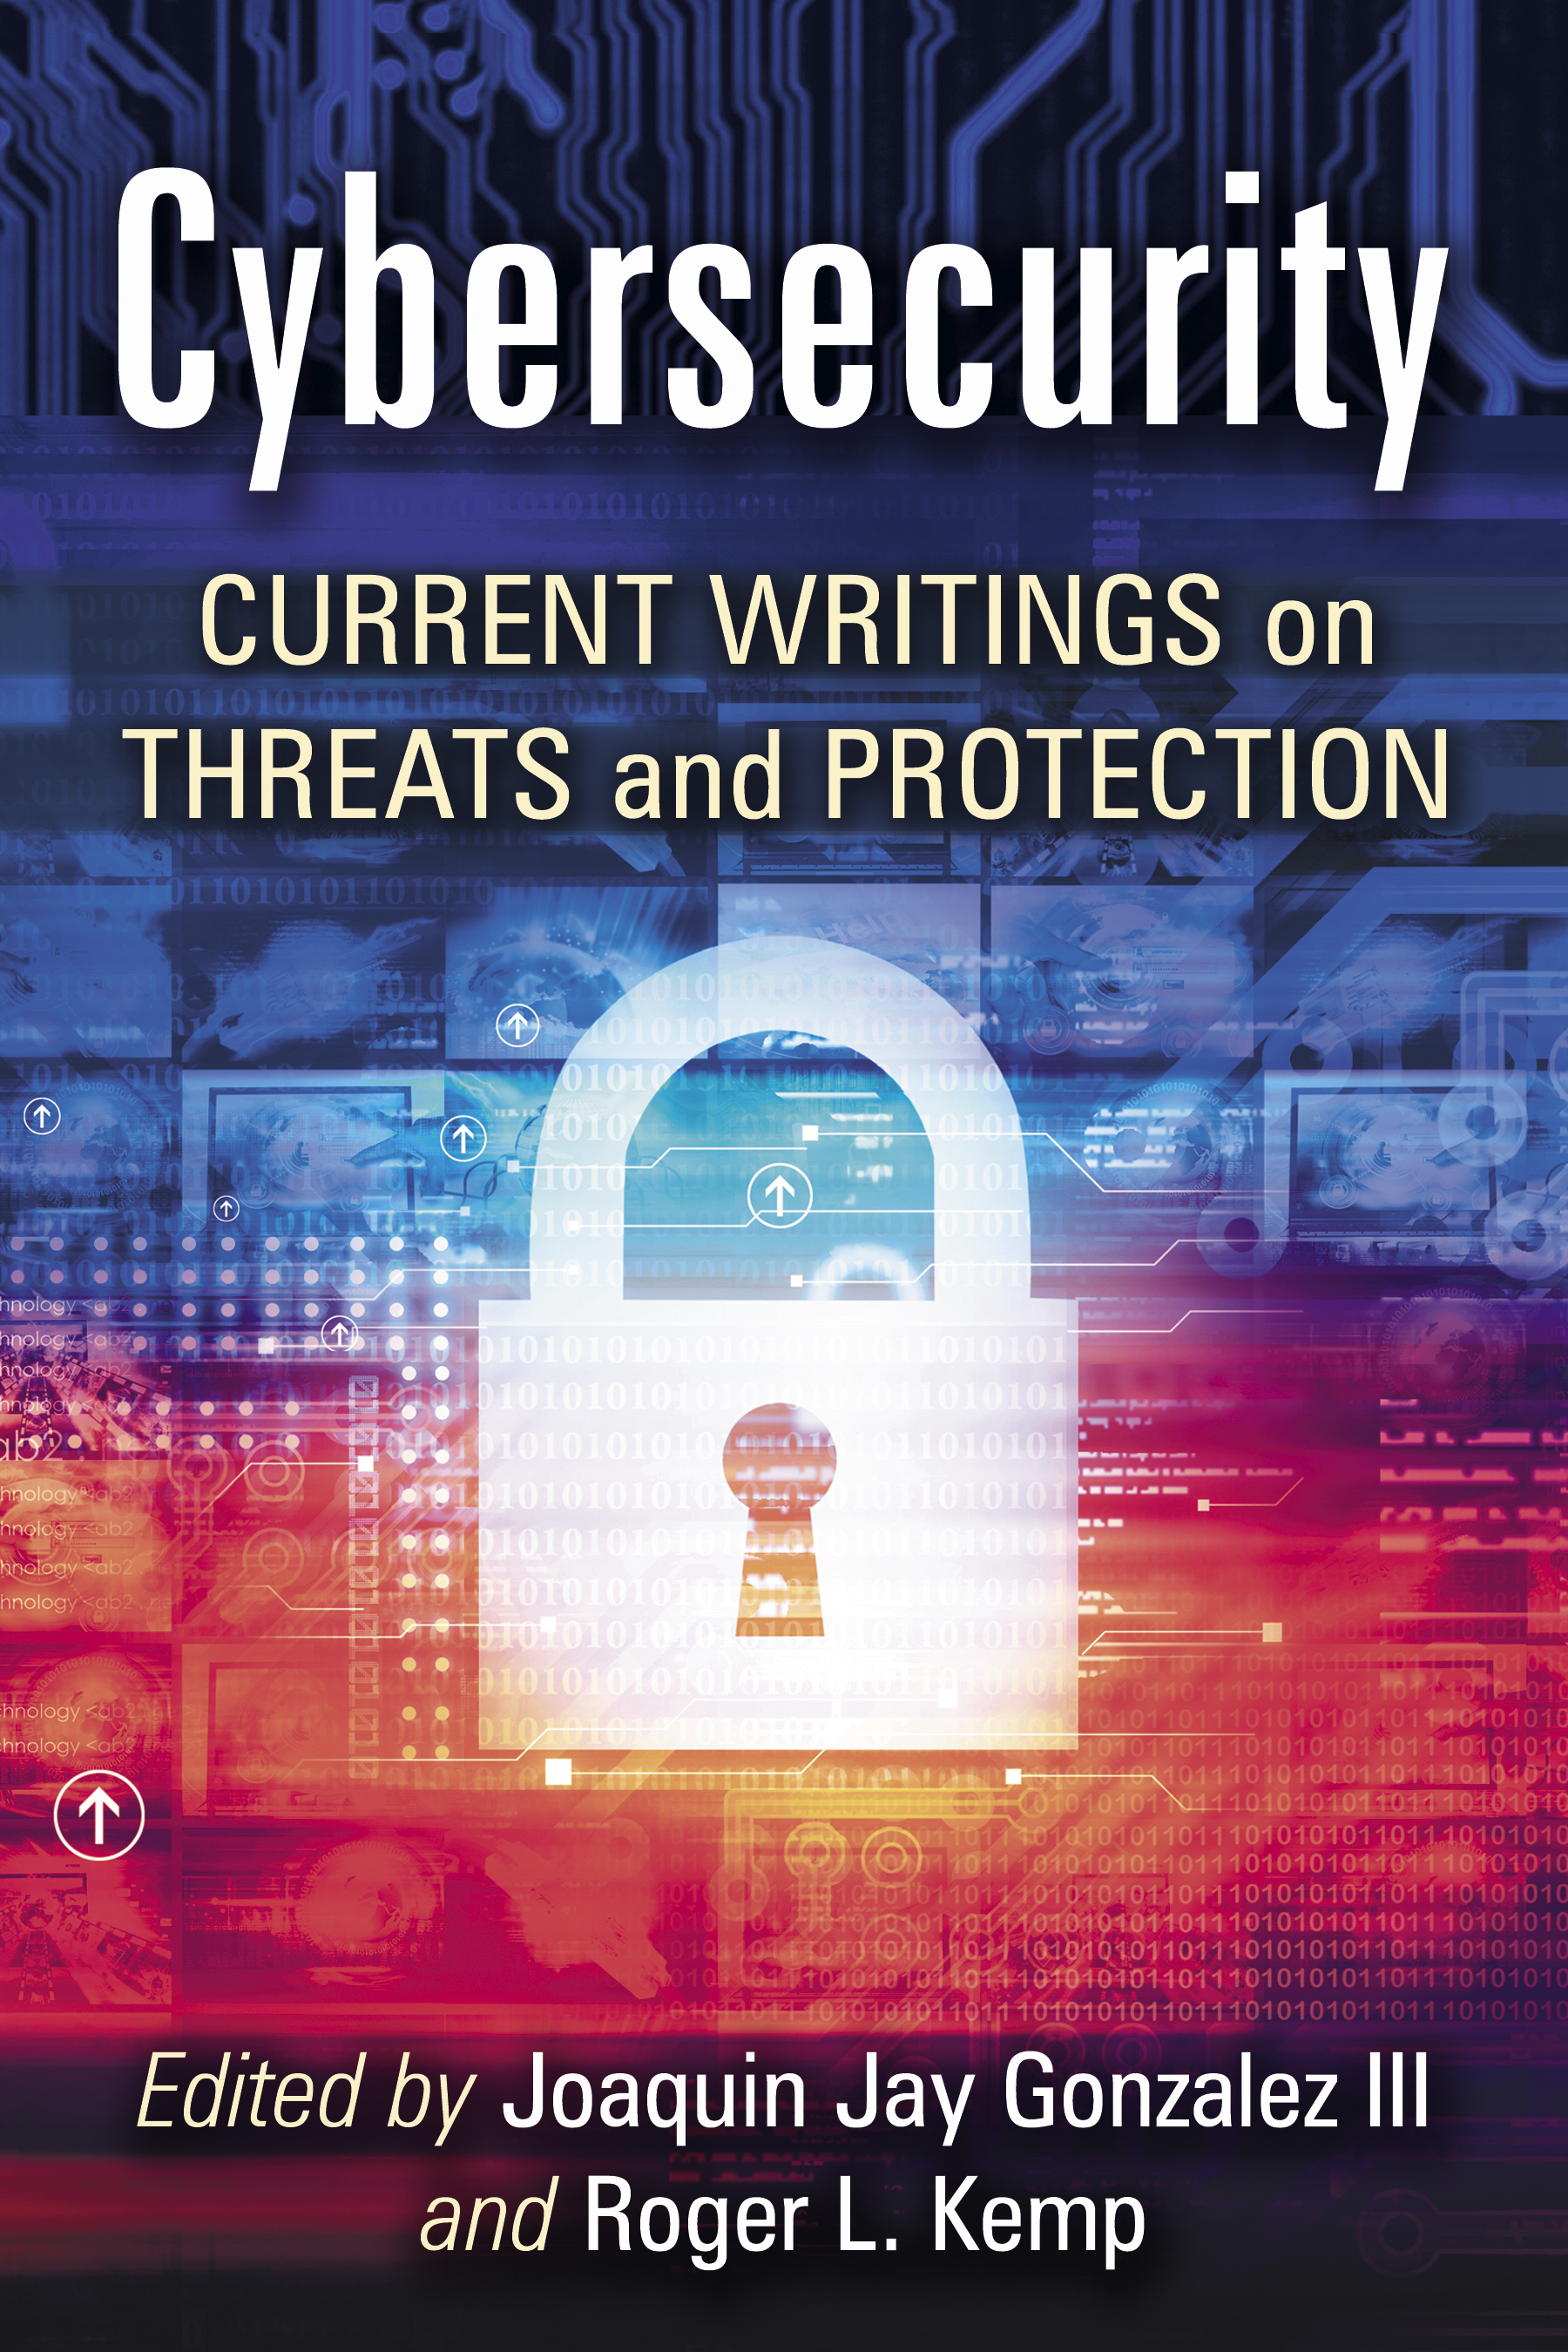 Cybersecurity Current Writings on Threats and Protection - image 1